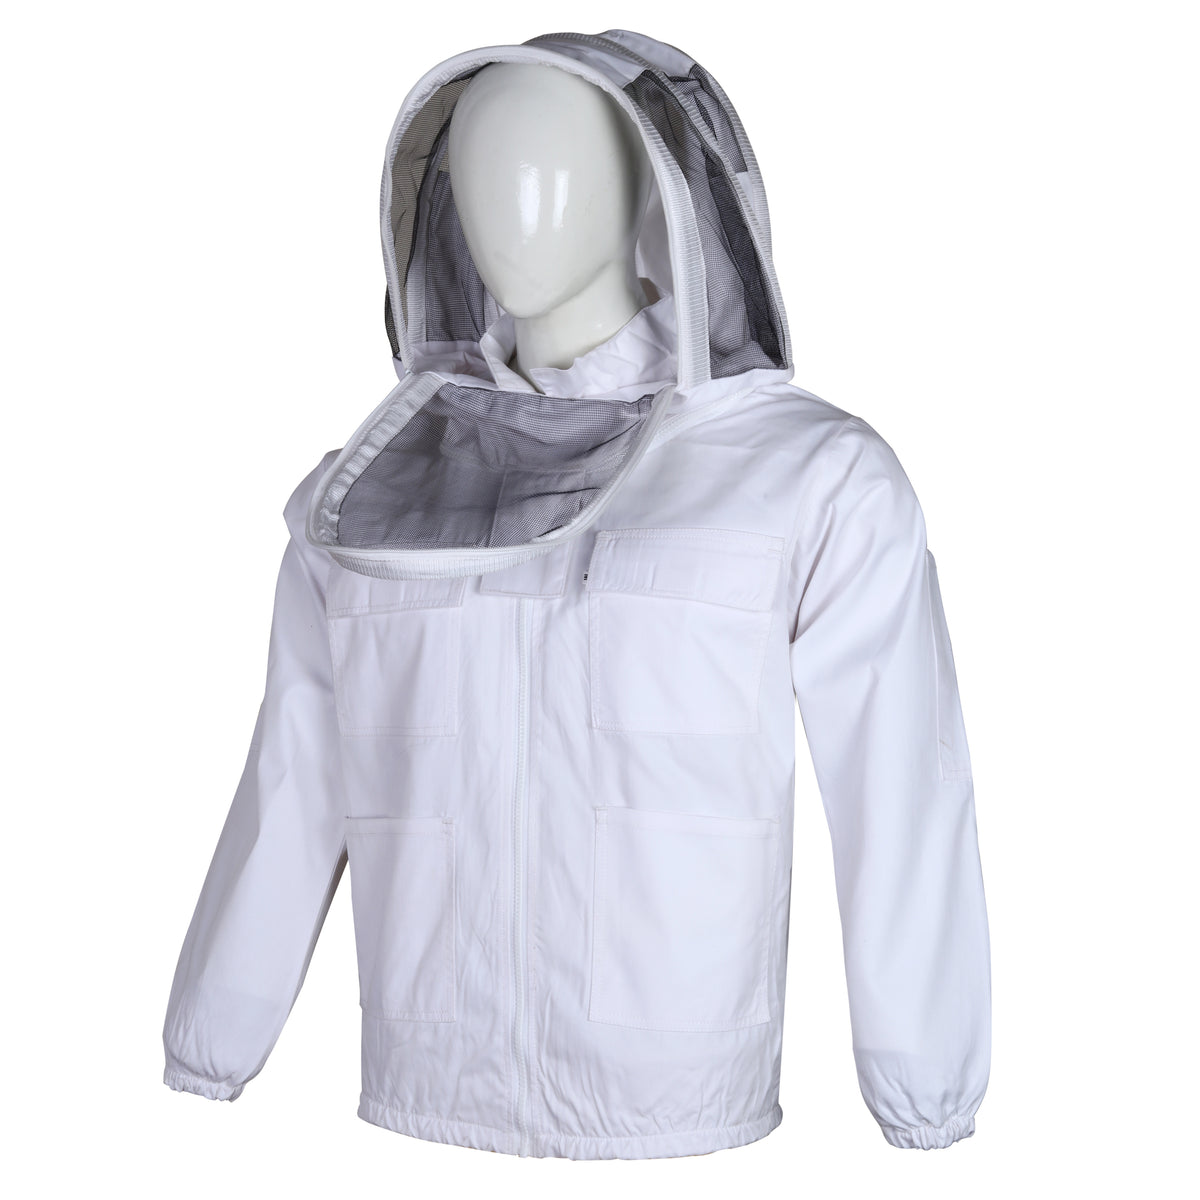 Beekeeping Cotton Anti-sting Shirt For Bees With Astronaut Fencing Veil